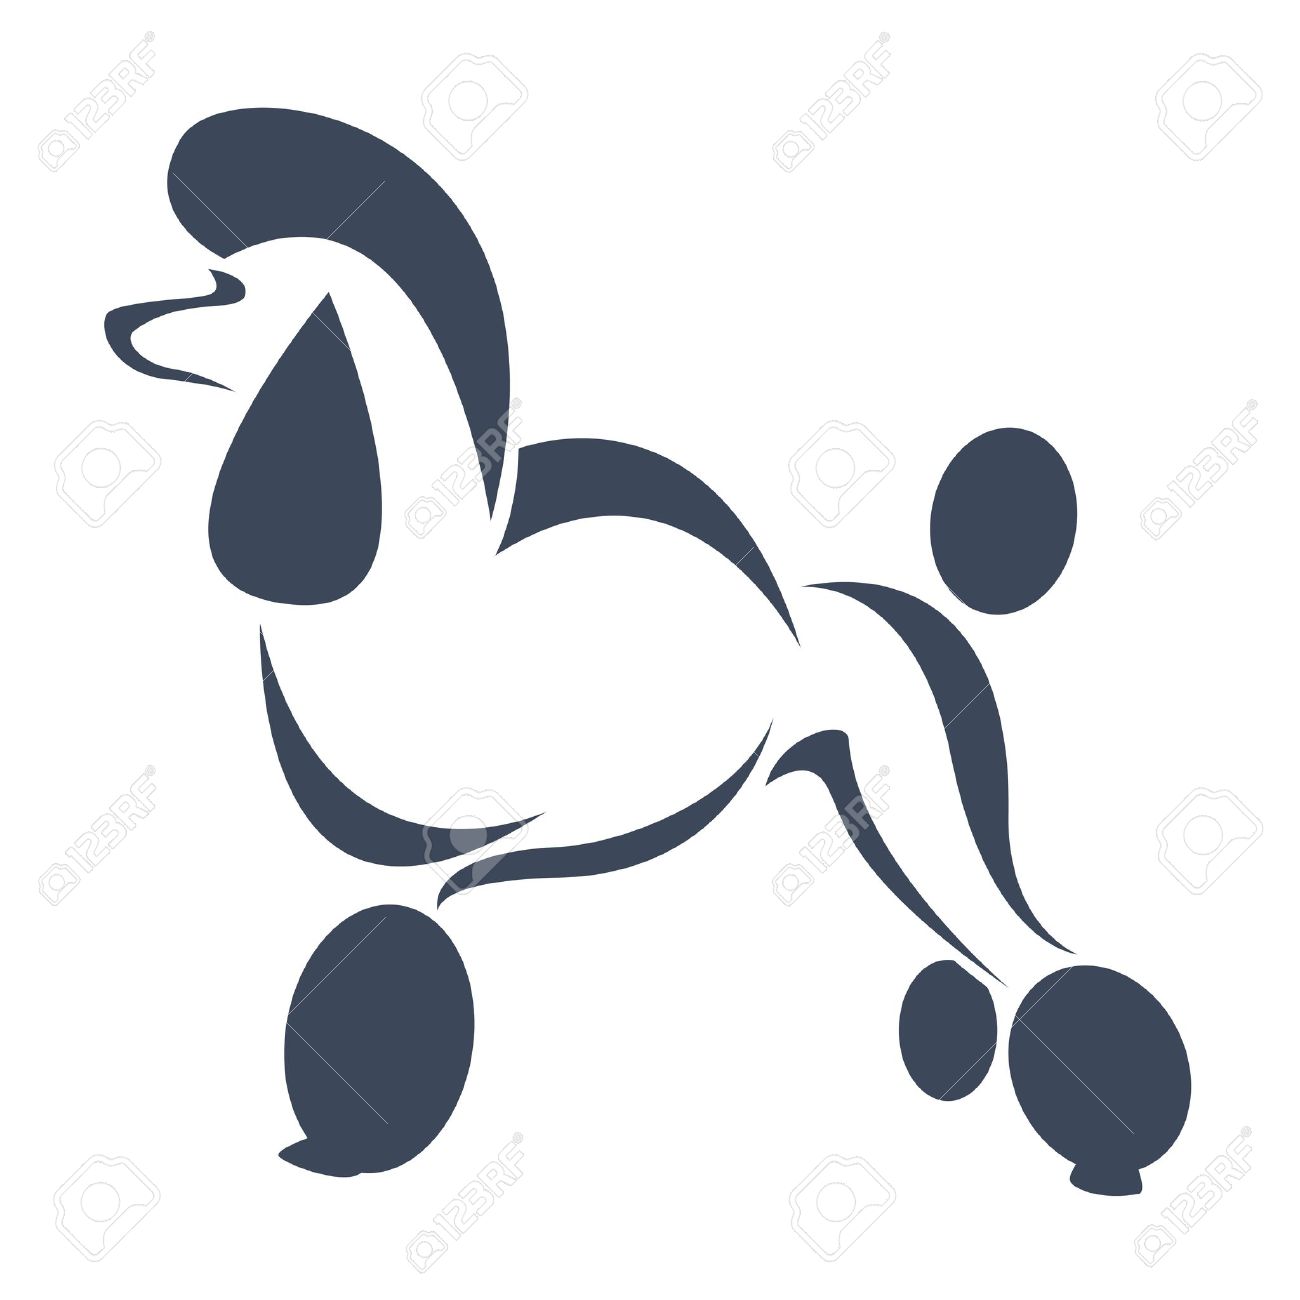 Standard Poodle clipart #5, Download drawings